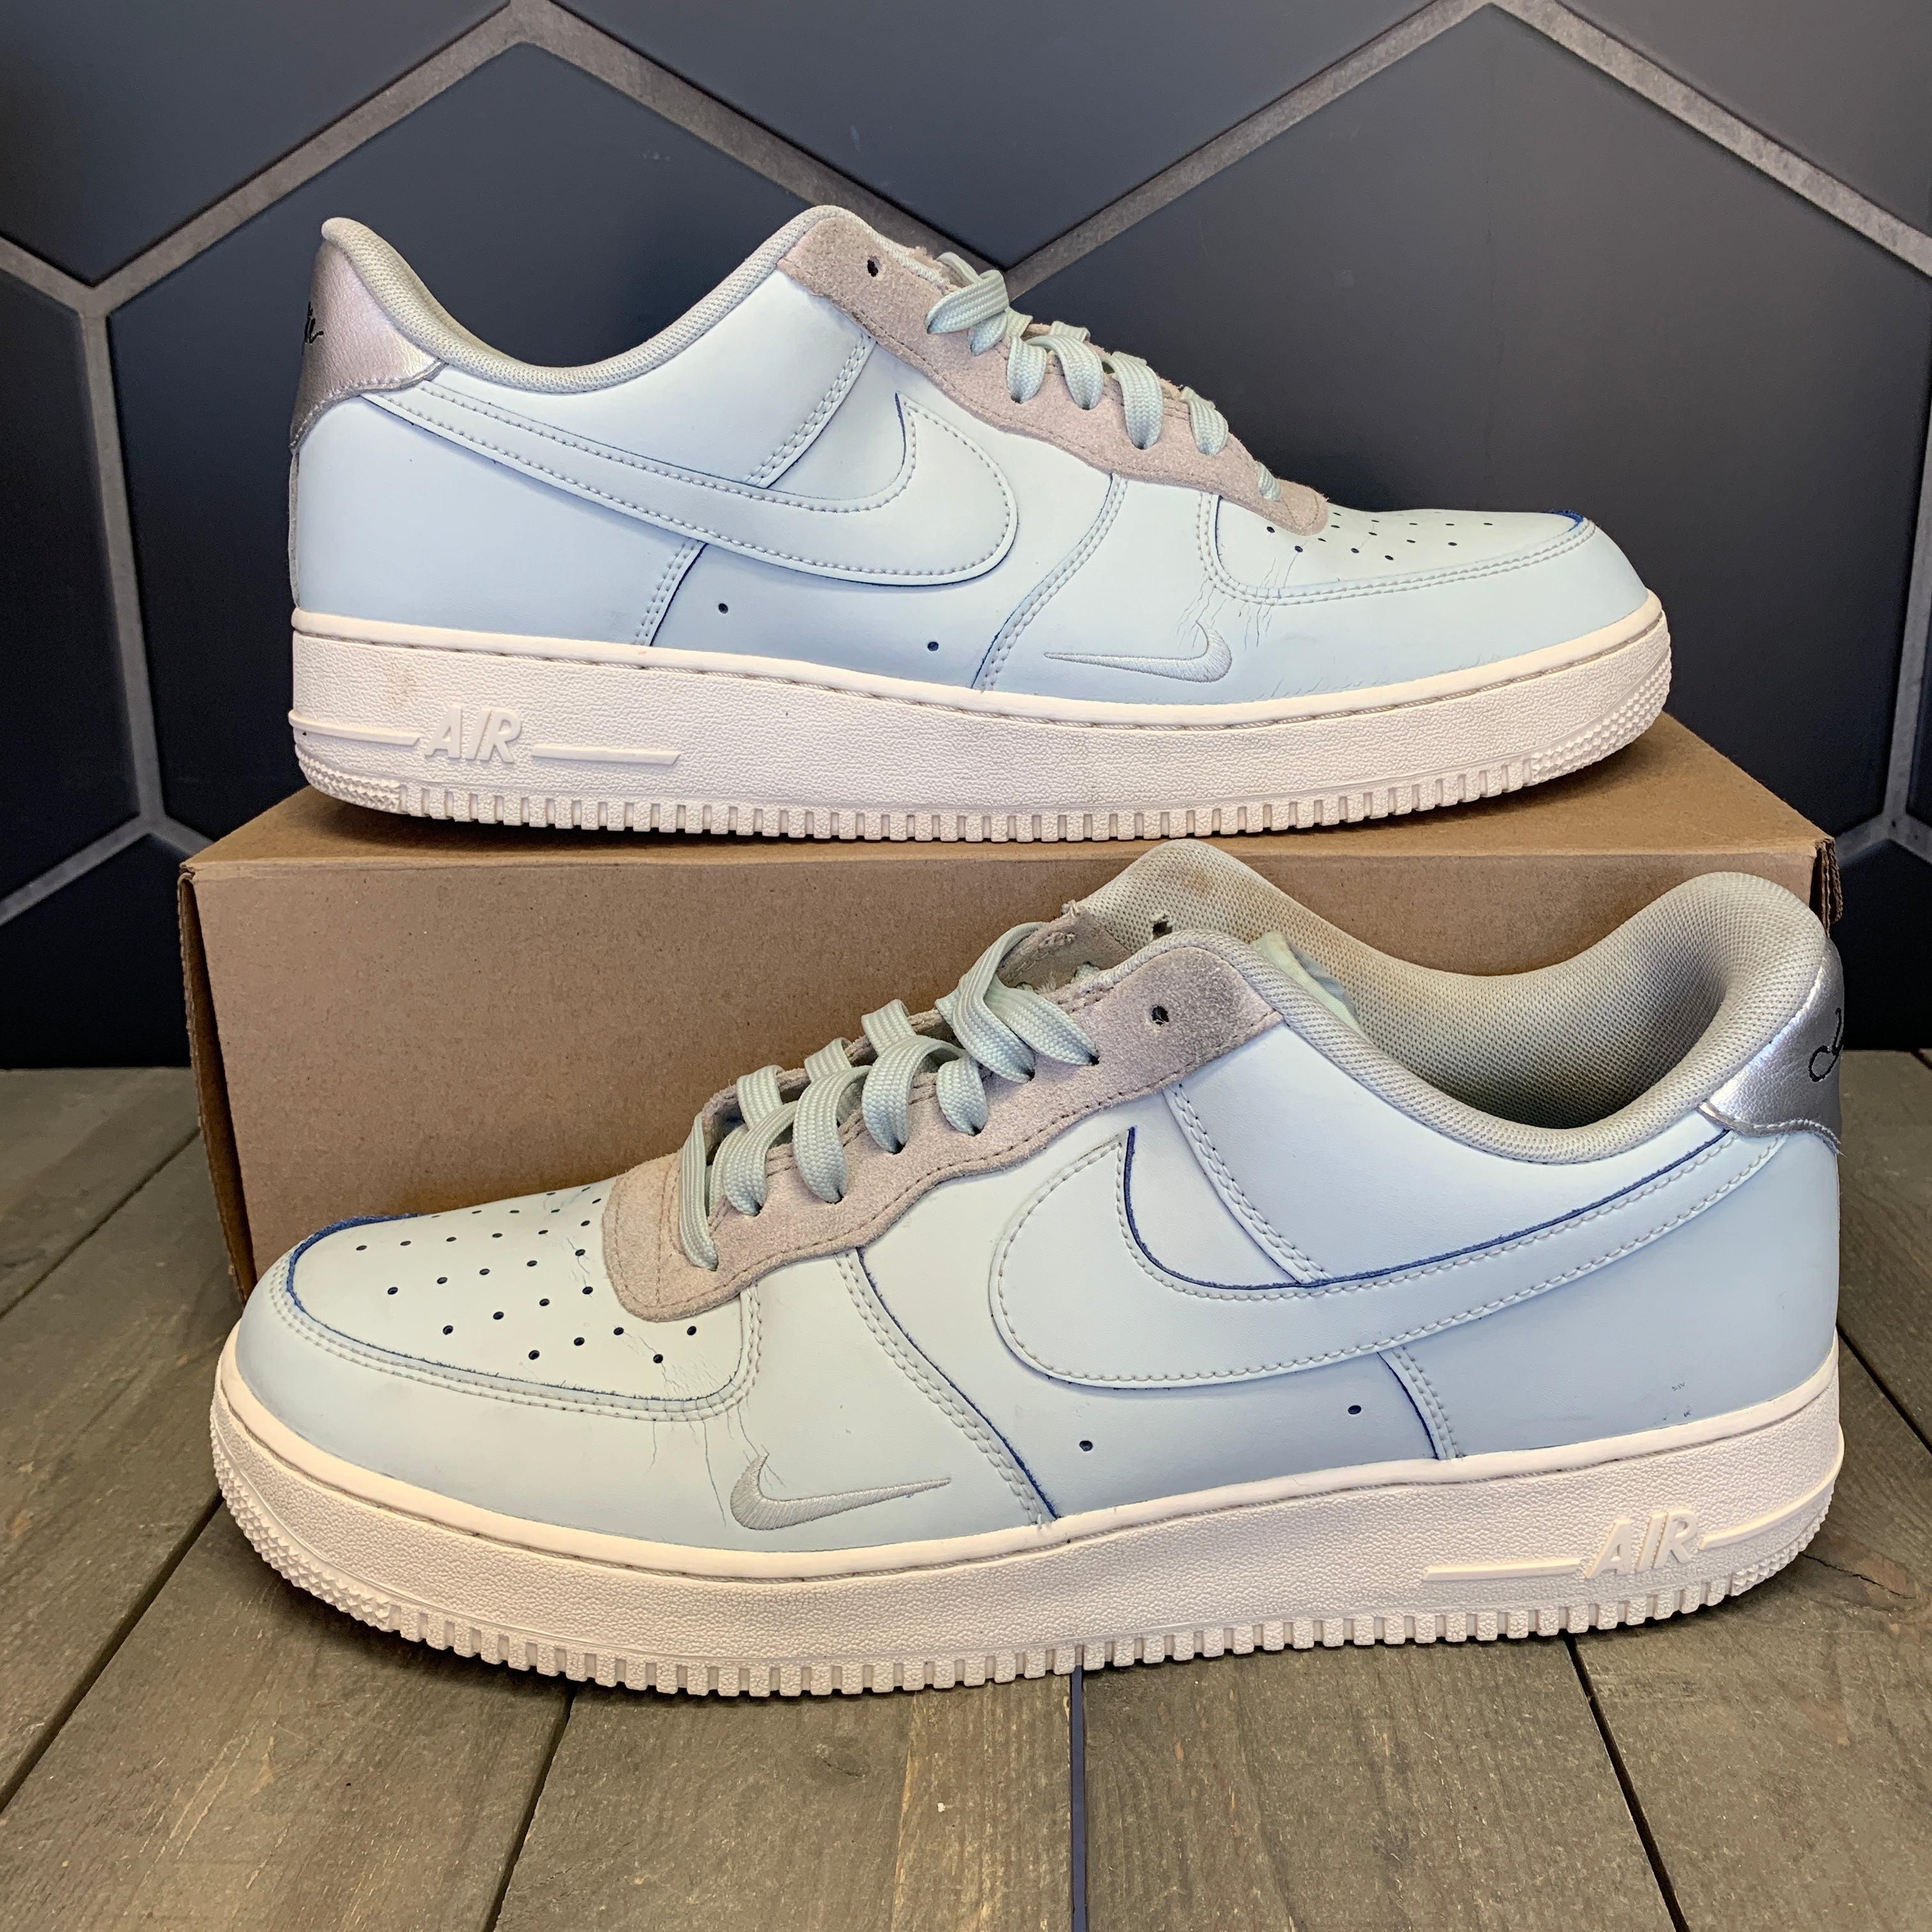 moss point air force 1s